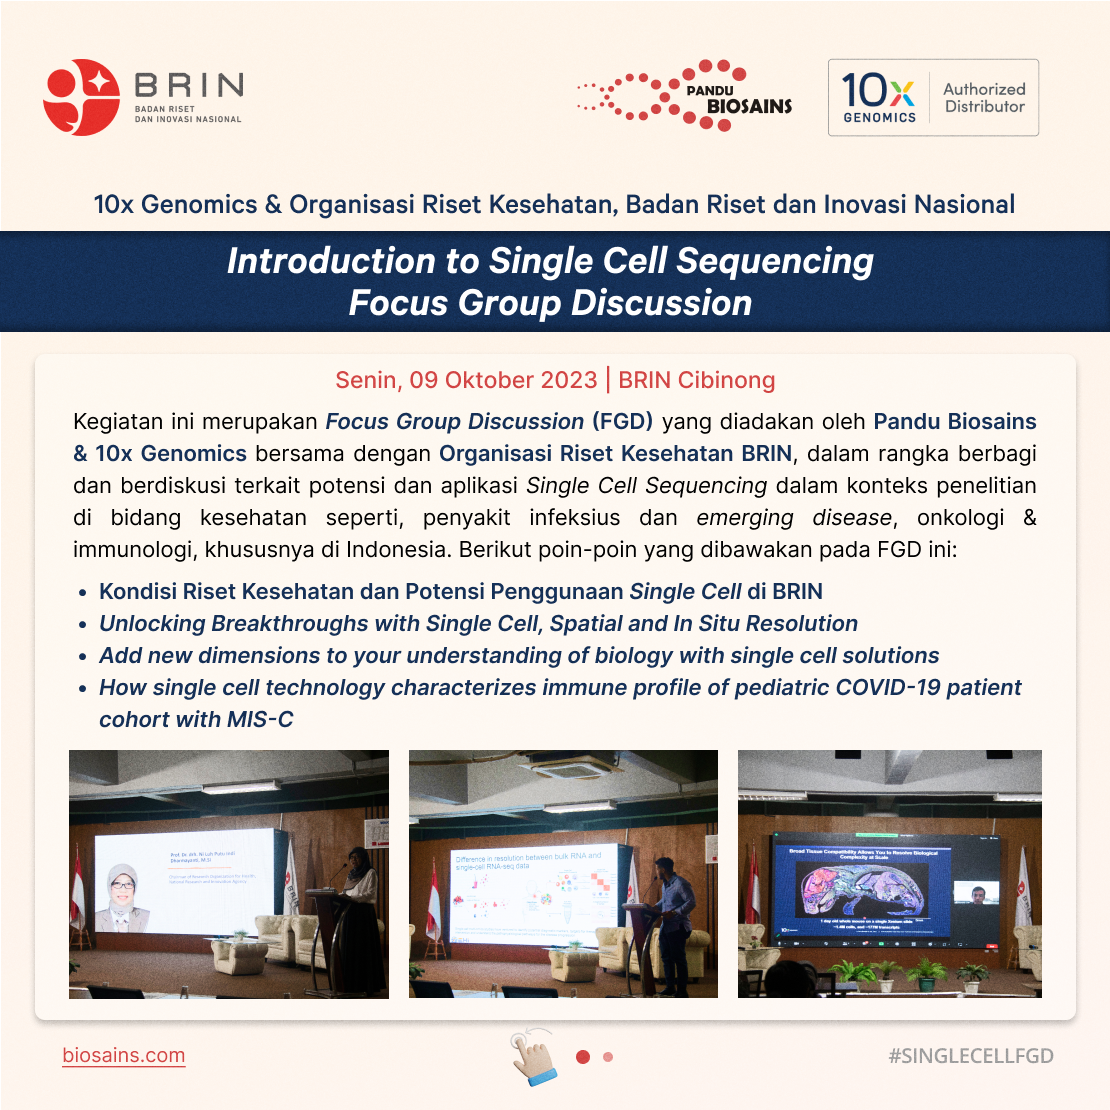 Introduction to Single Cell Sequencing: Focus Group Discussion